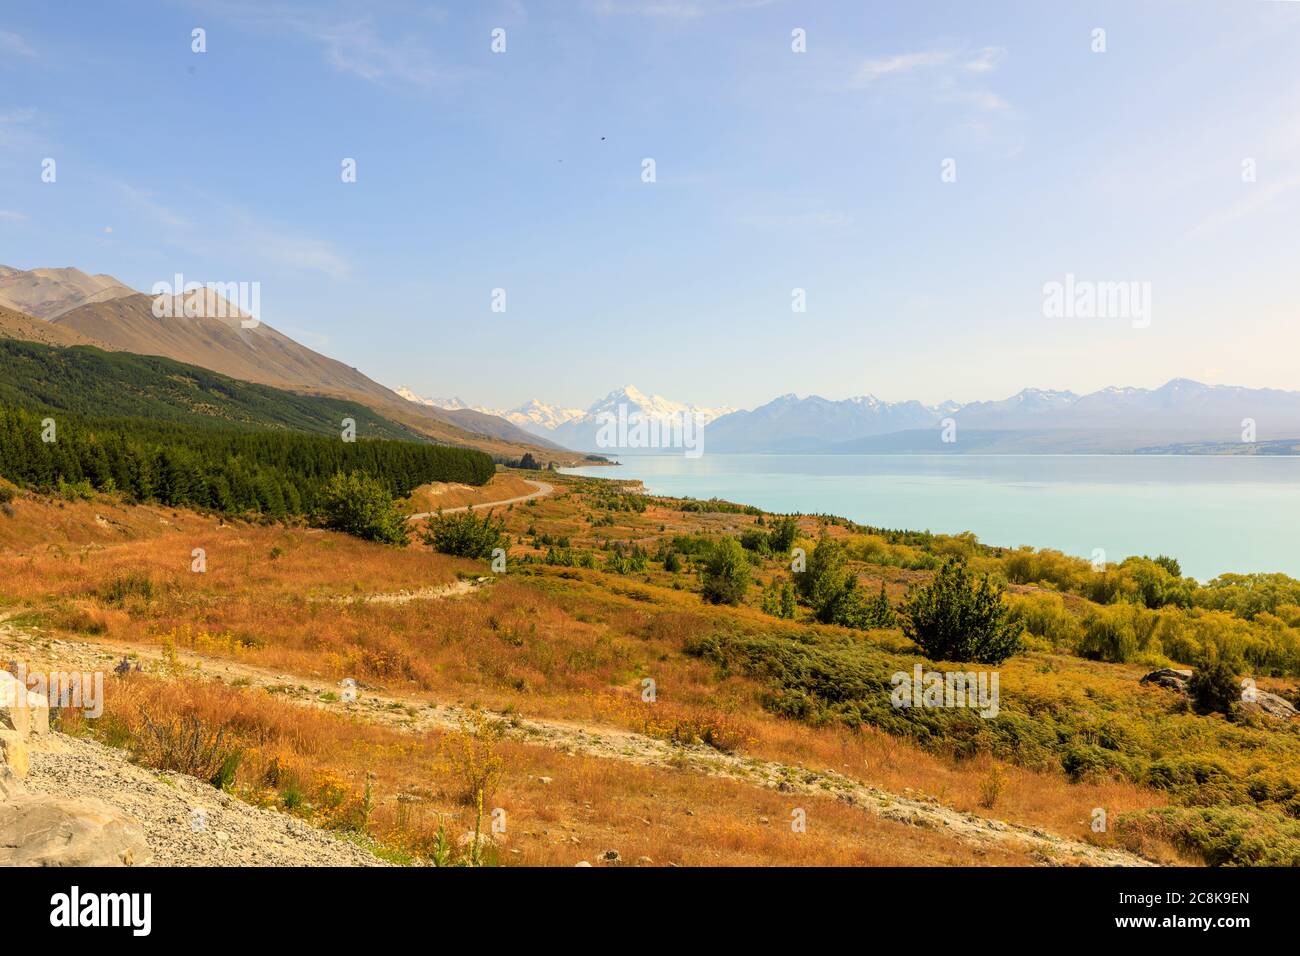 The view from Peters Lookout on Highway 80 over Lake Pukaki, leading Mt Cook in the background. Stock Photo